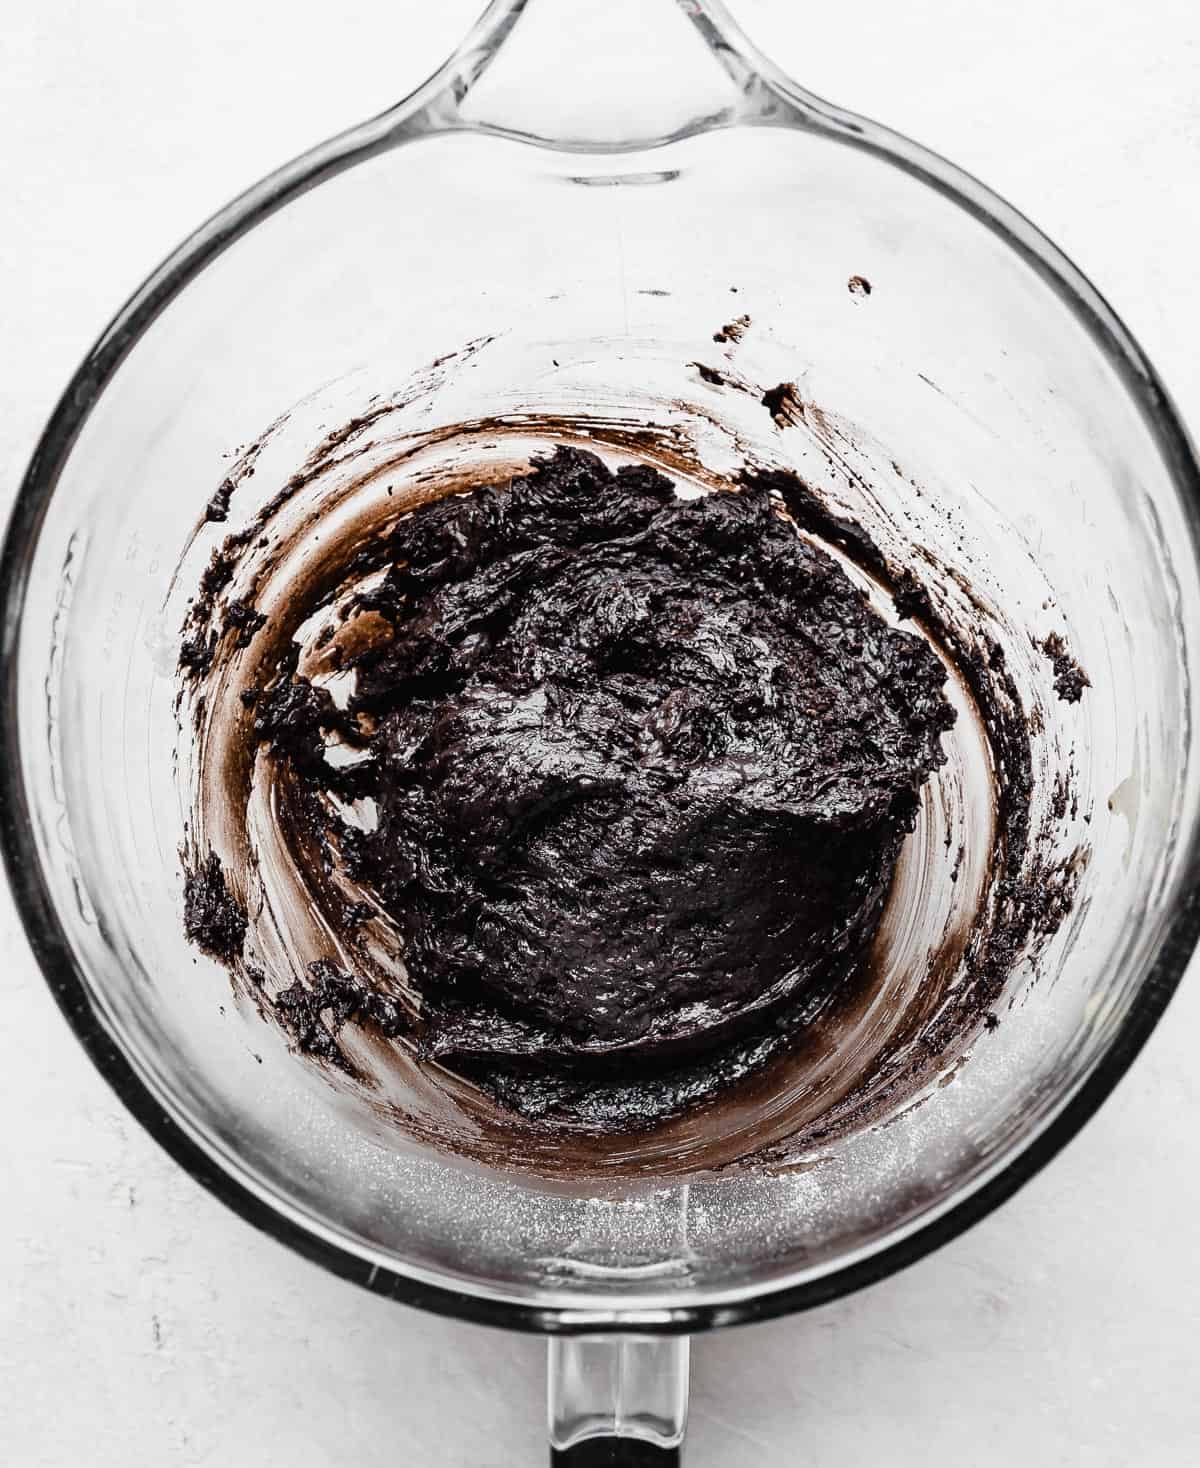 Oreo Donut batter in a glass mixing bowl.